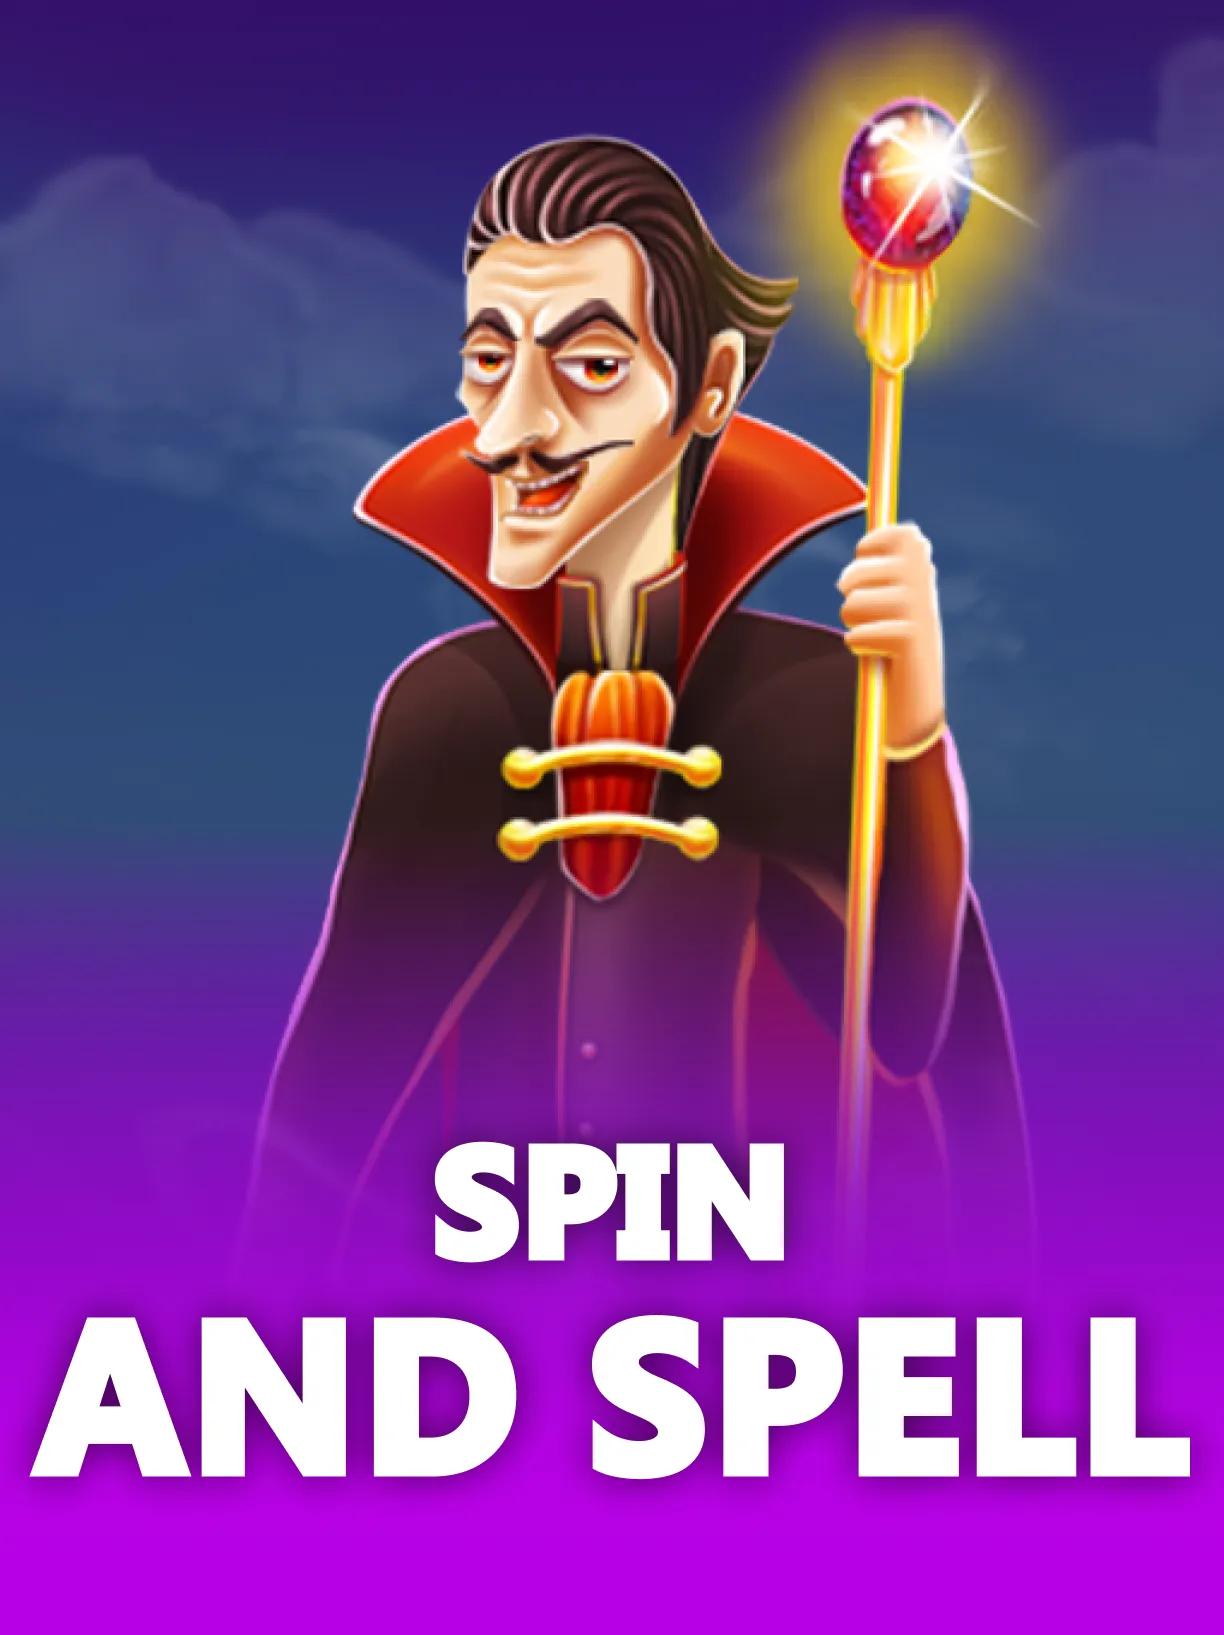 Spin_And_Spell_square.webp